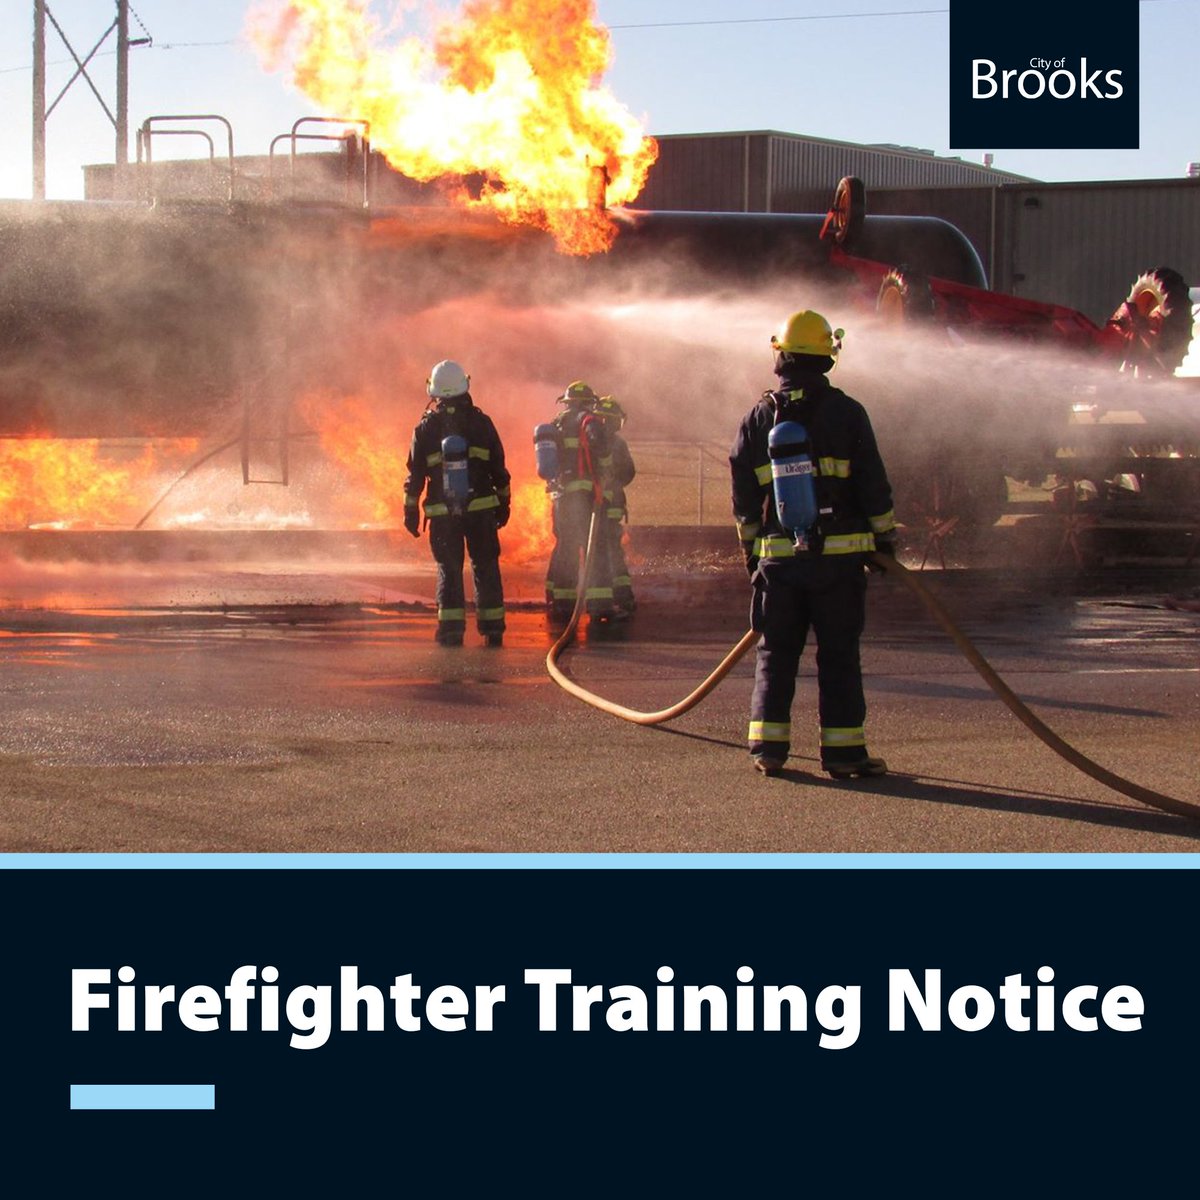 The Brooks Fire Department will be training with live fire at the Brooks Regional Fire Training Facility (280 Canal Street East) today, April 24 and tomorrow, April 25. Don't be alarmed by large flames or smoke in the Training Facility area.